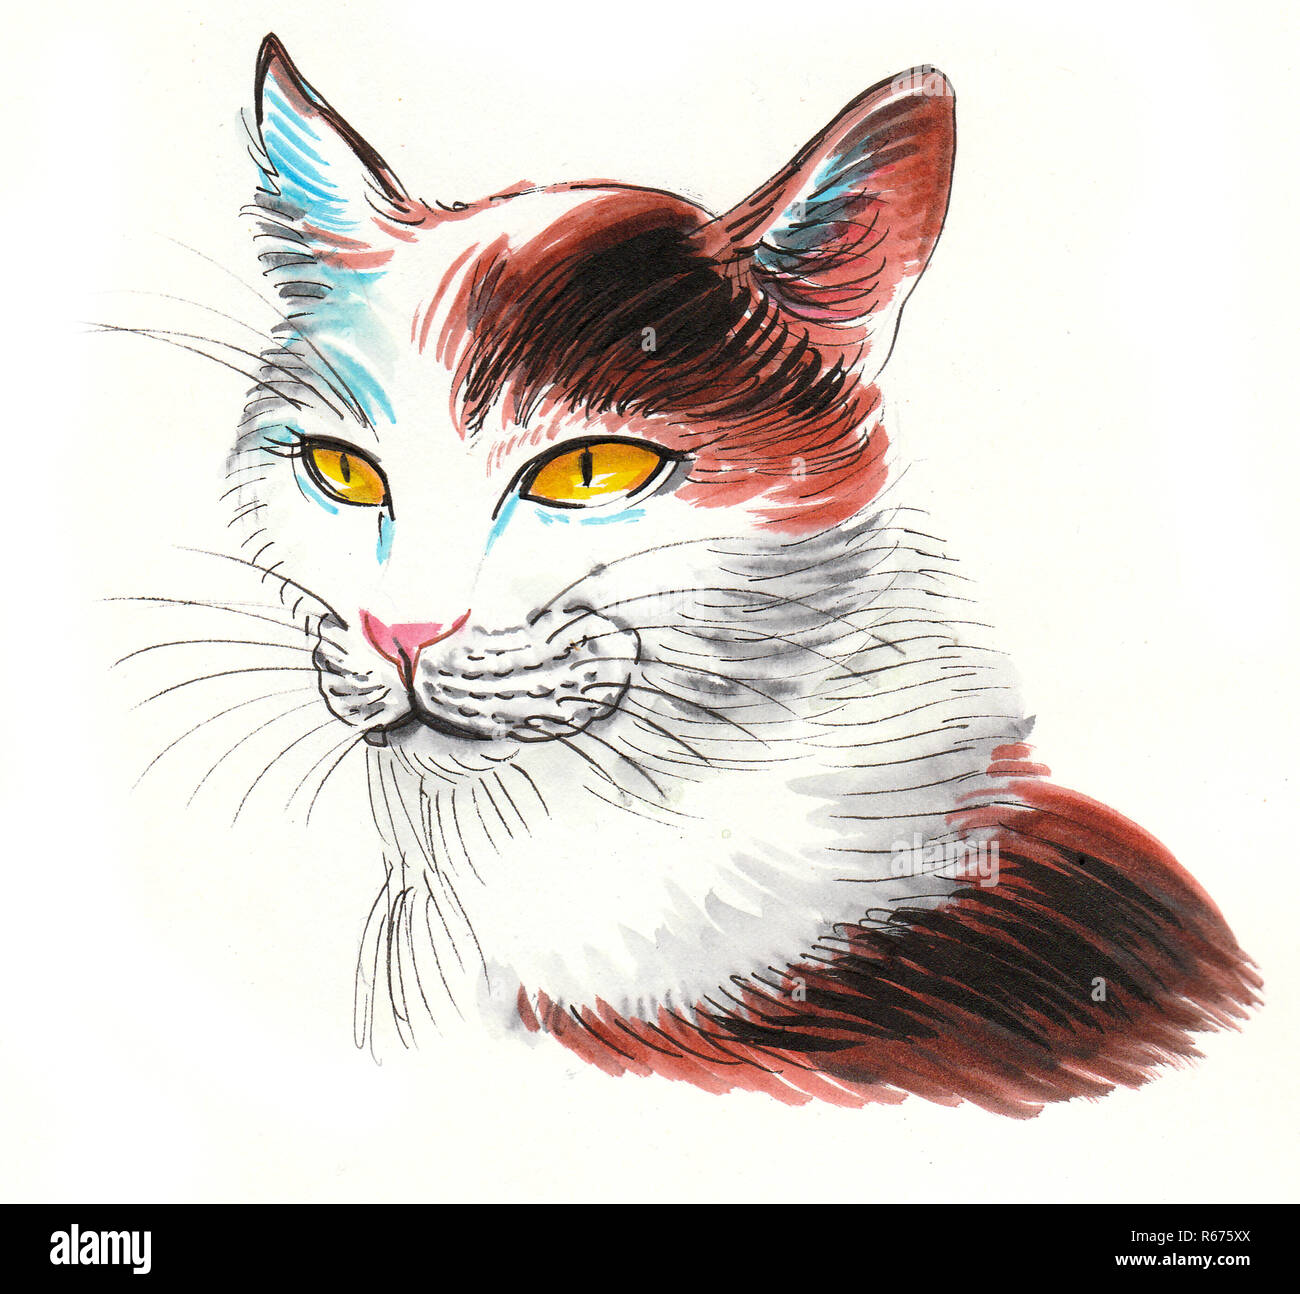 Cat with yellow eyes. Ink and watercolor drawing Stock Photo - Alamy